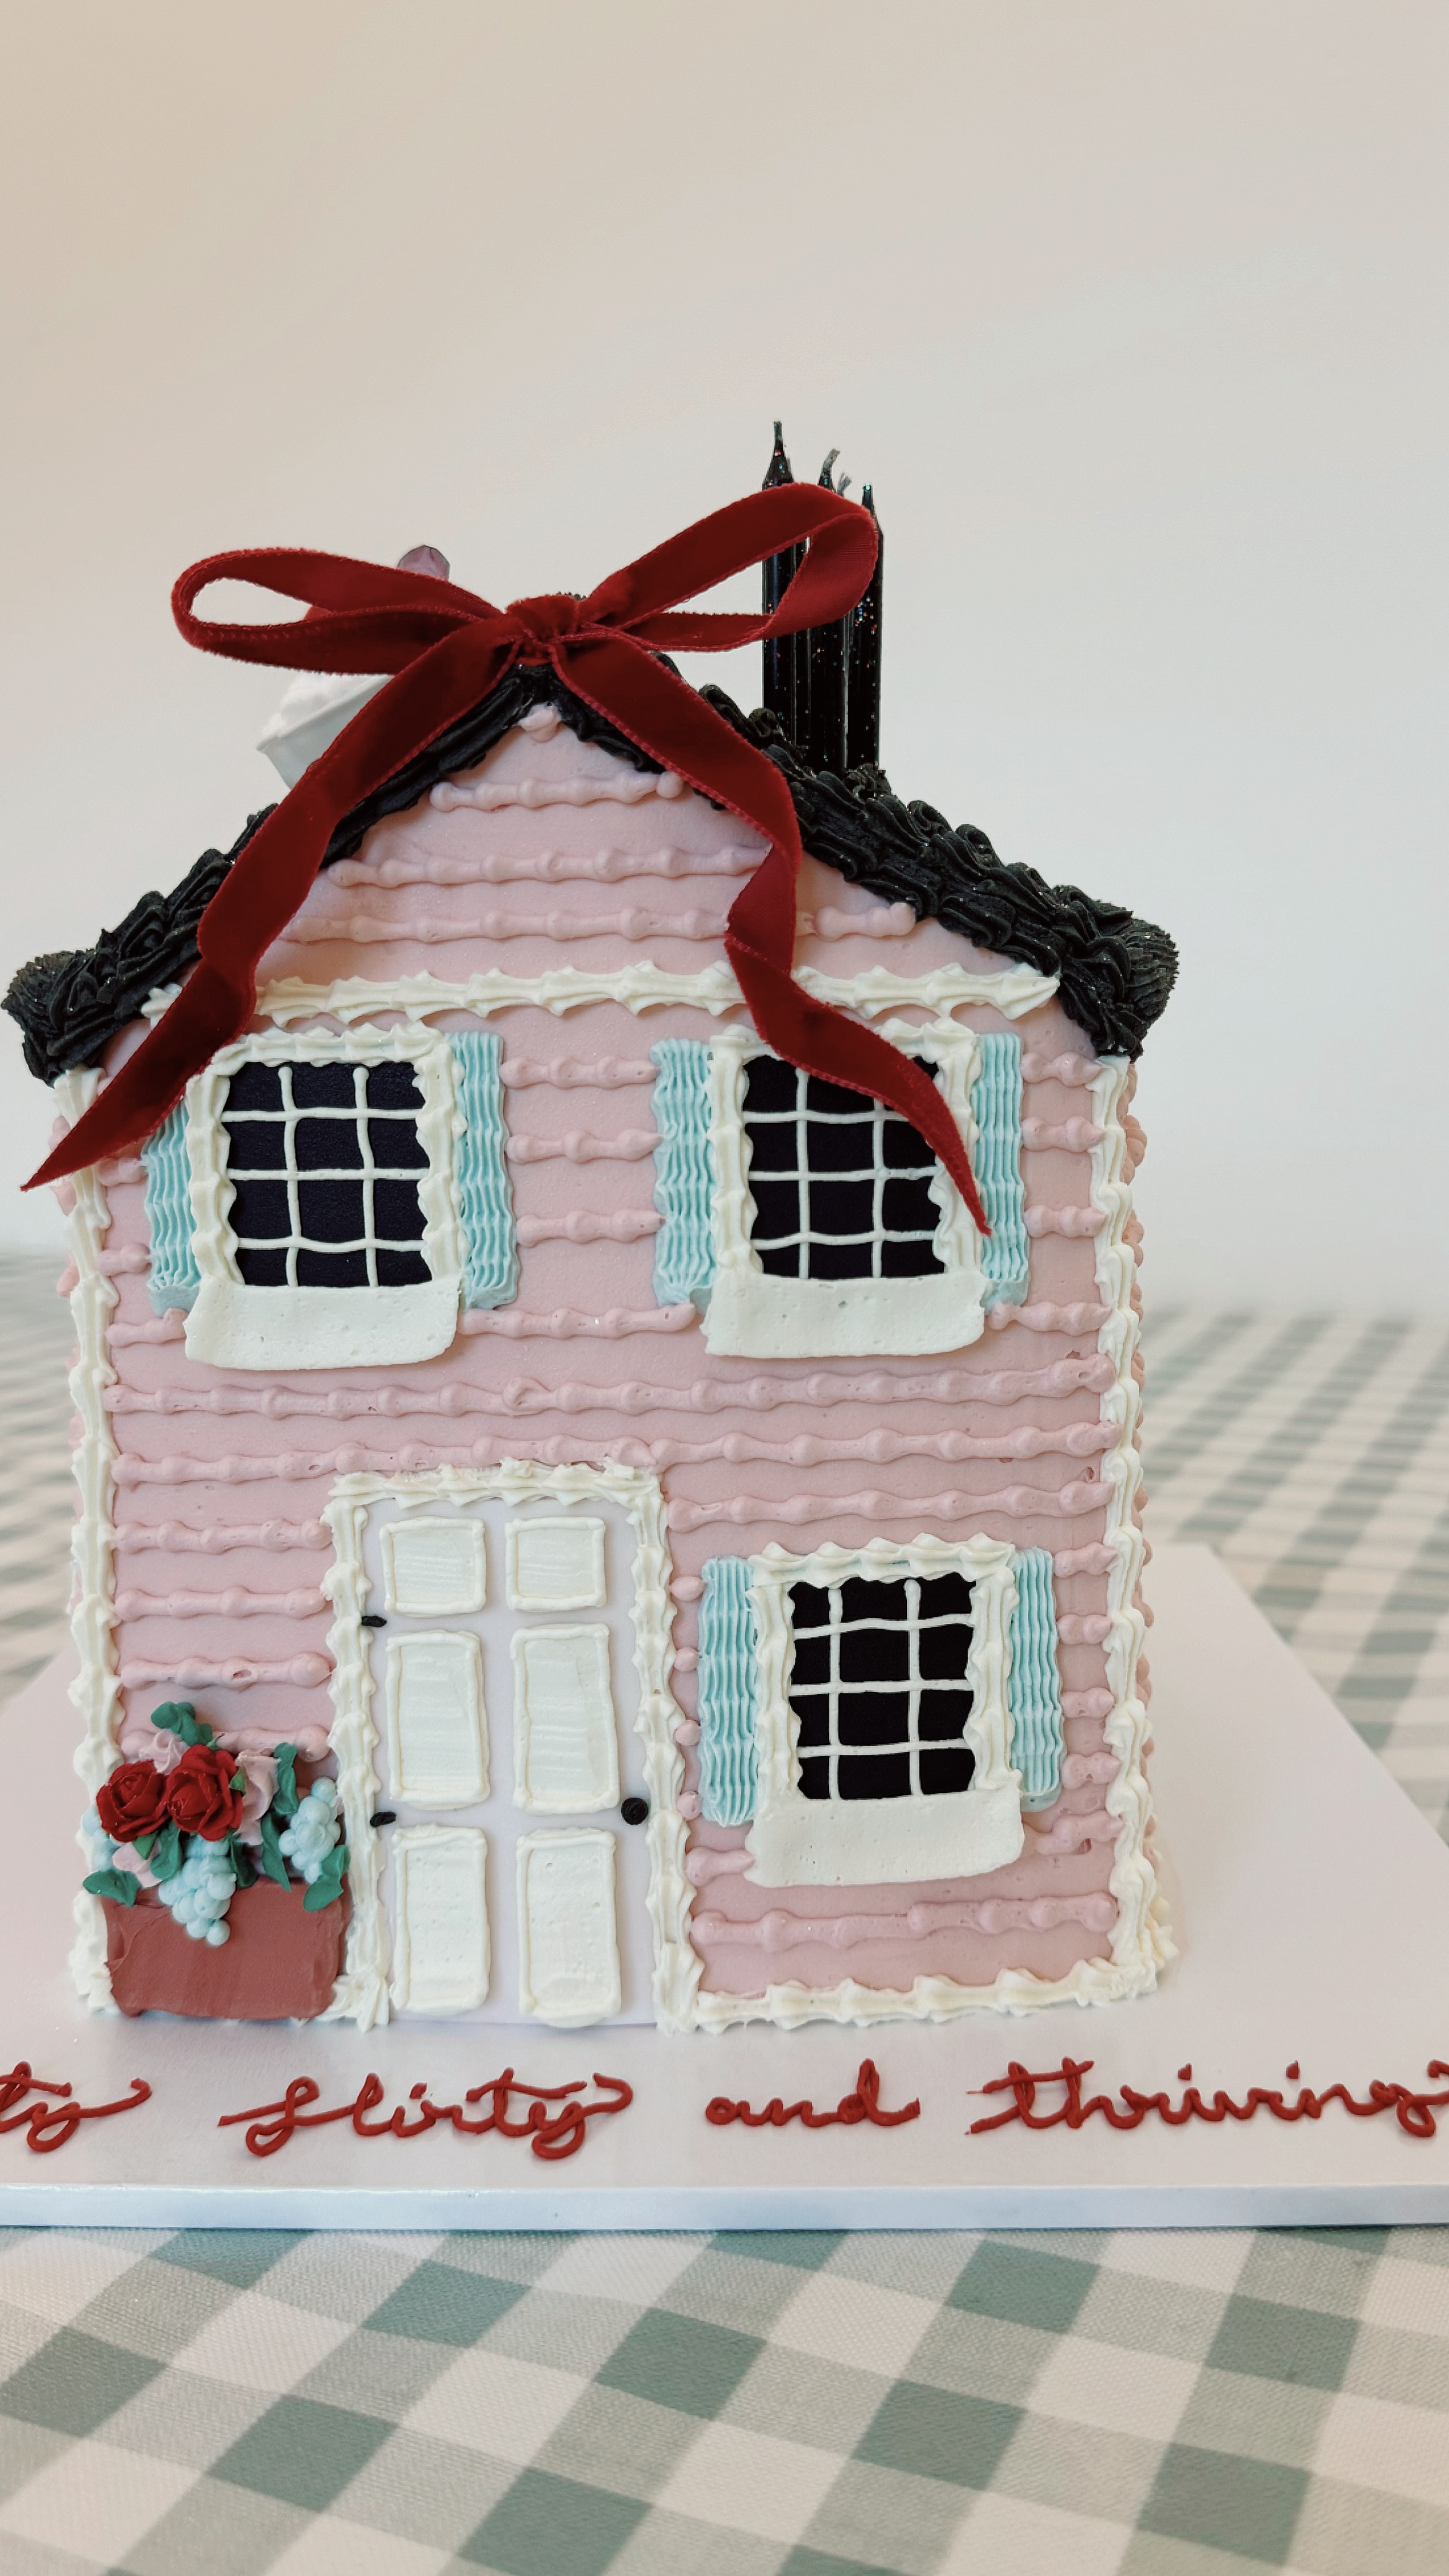 Bridie West made a cake which resembles Jenna's dreamhouse from the movie 13 Going On 30 